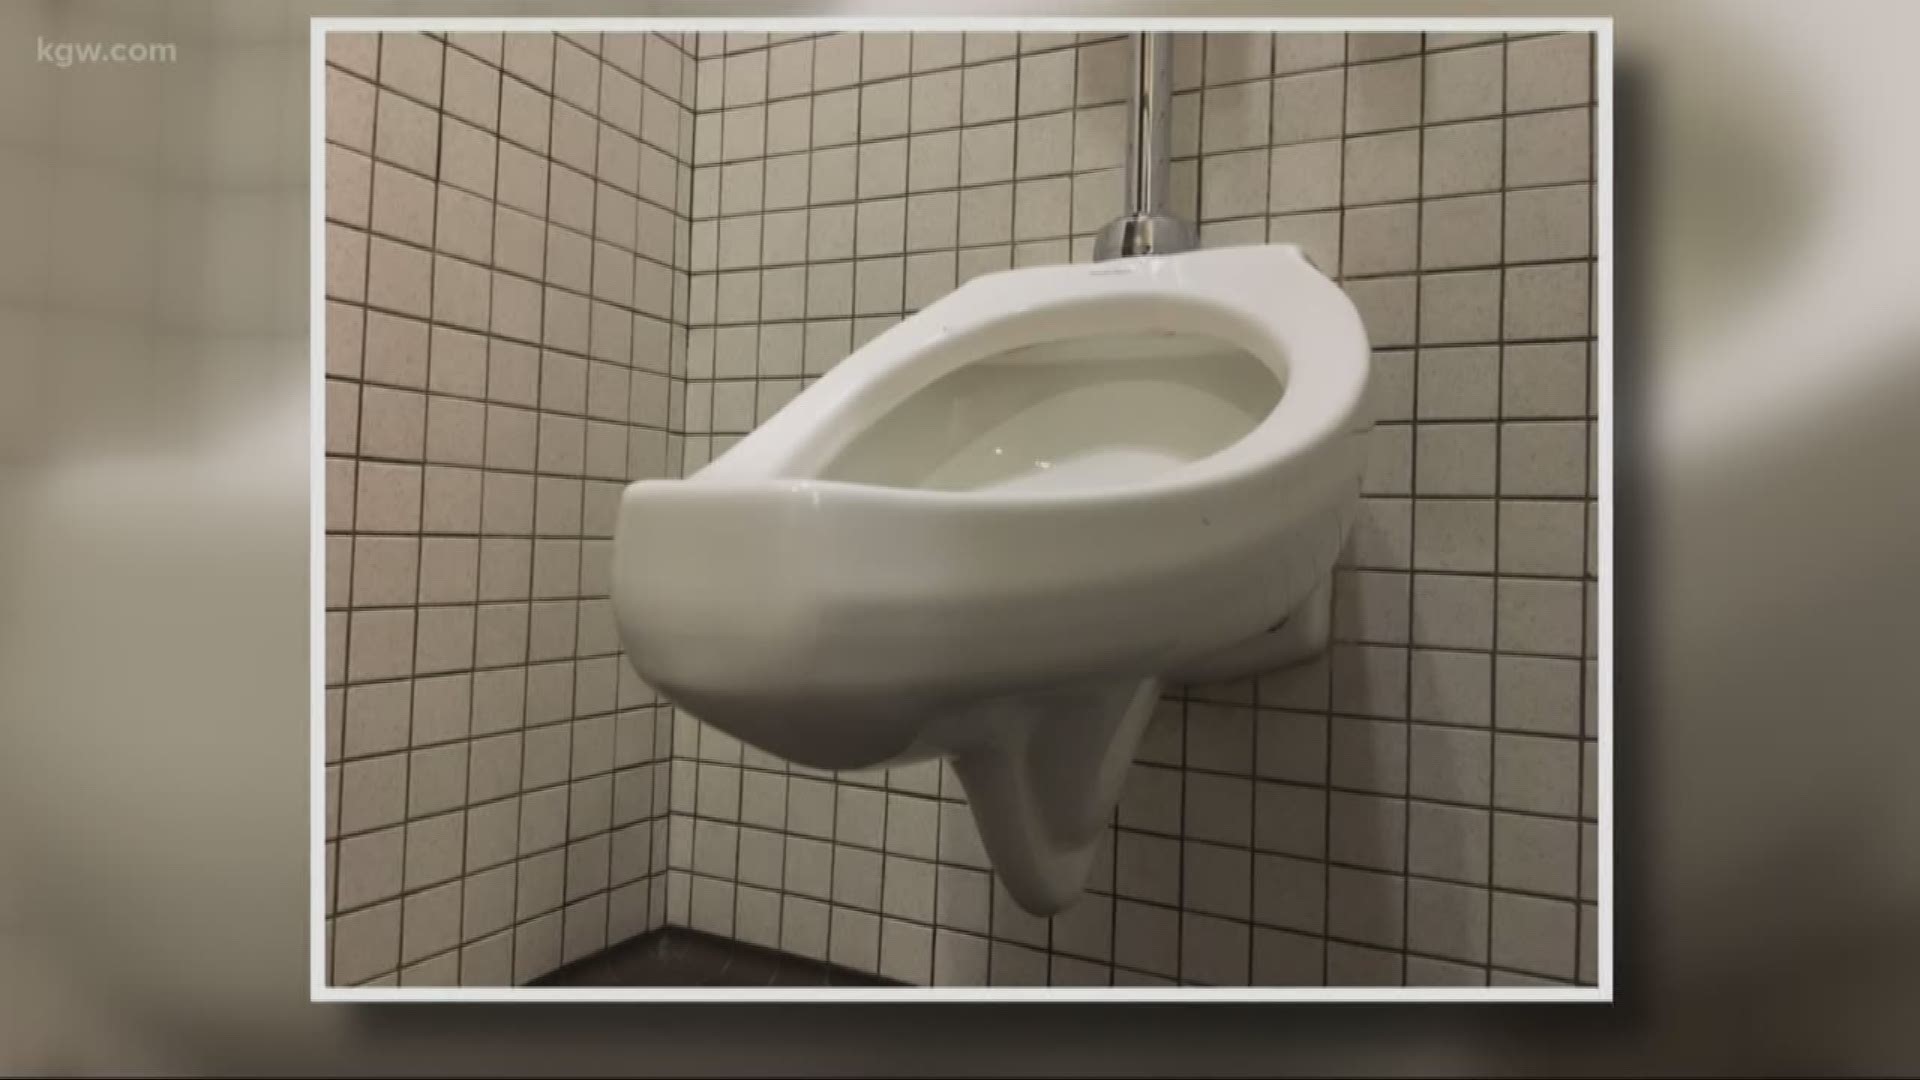 The City of Portland is taking out all urinals in the men's bathrooms during the remodel of the Portland Building downtown.